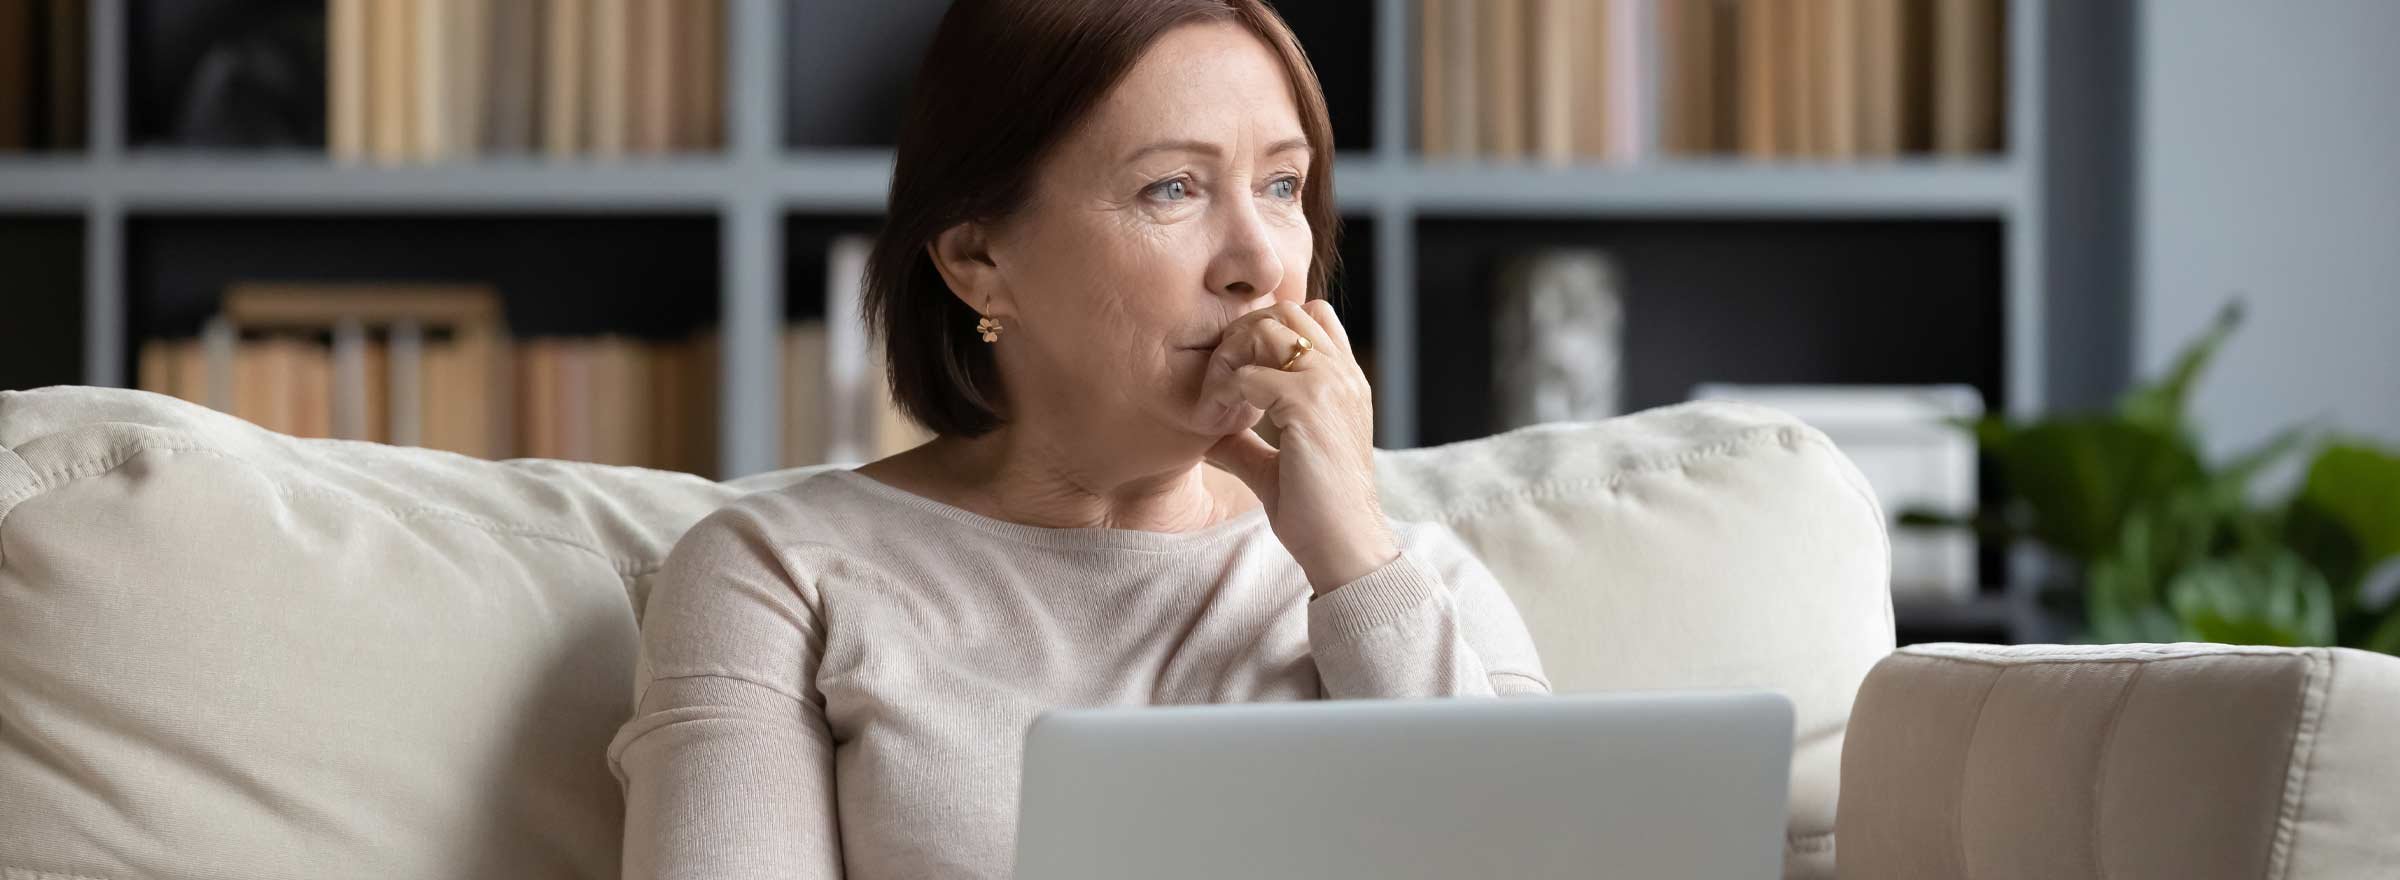 woman on a sofa holding a laptop and gazing into the distance